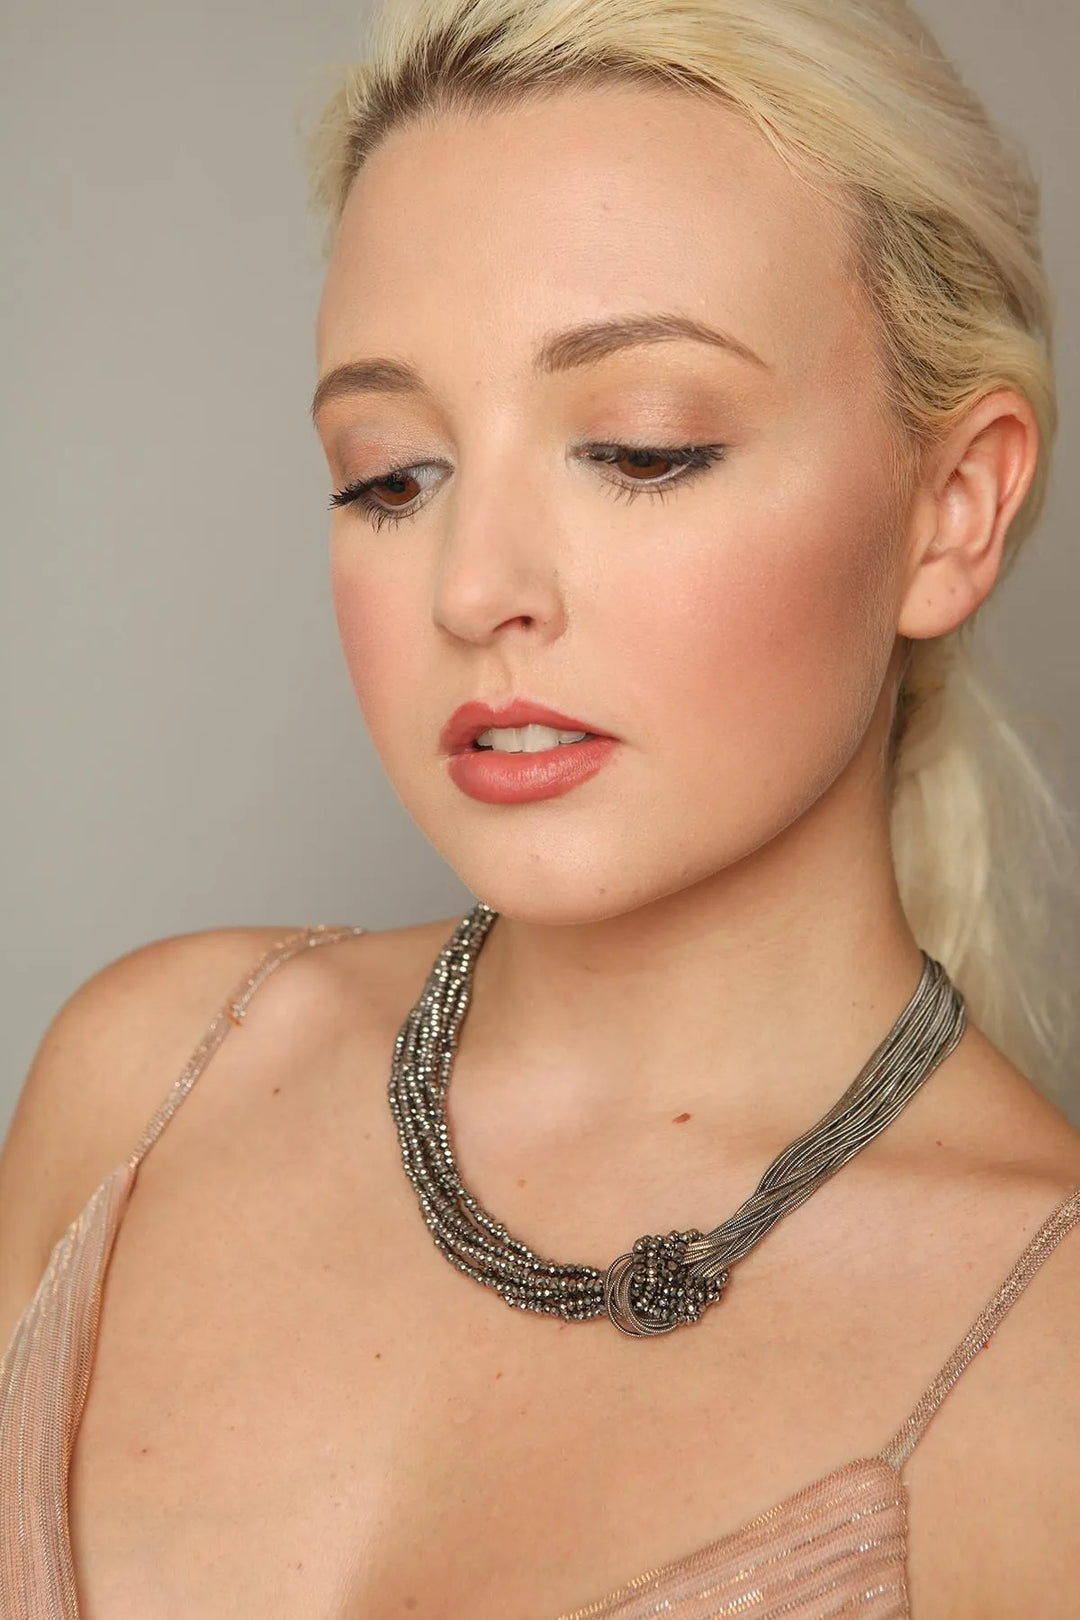 Knotted Chain Layered Statement Necklace Silver